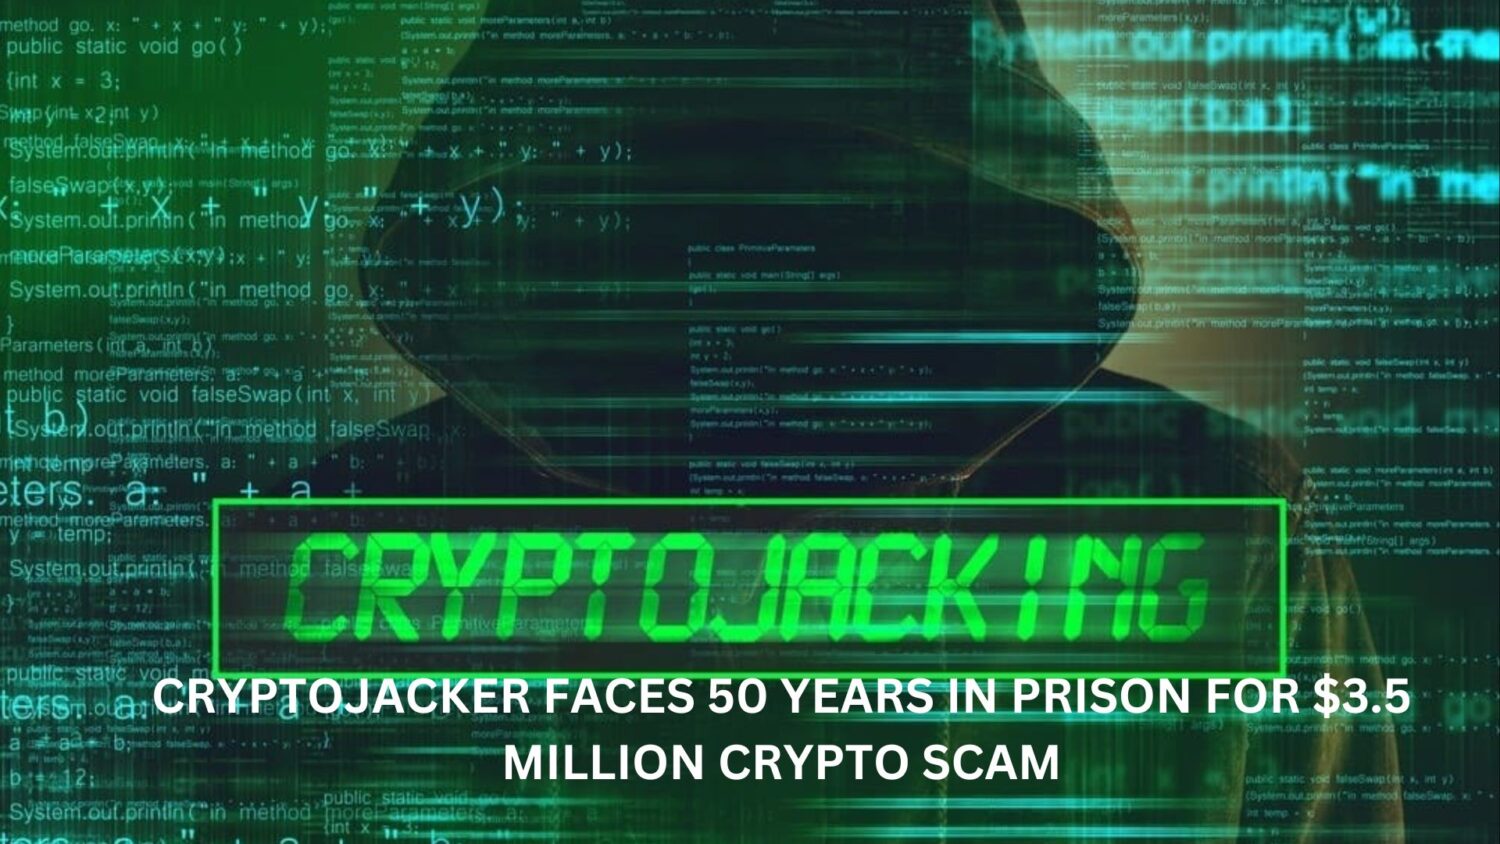 Cryptojacker Faces 50 Years In Prison For $3.5 Million Crypto Scam